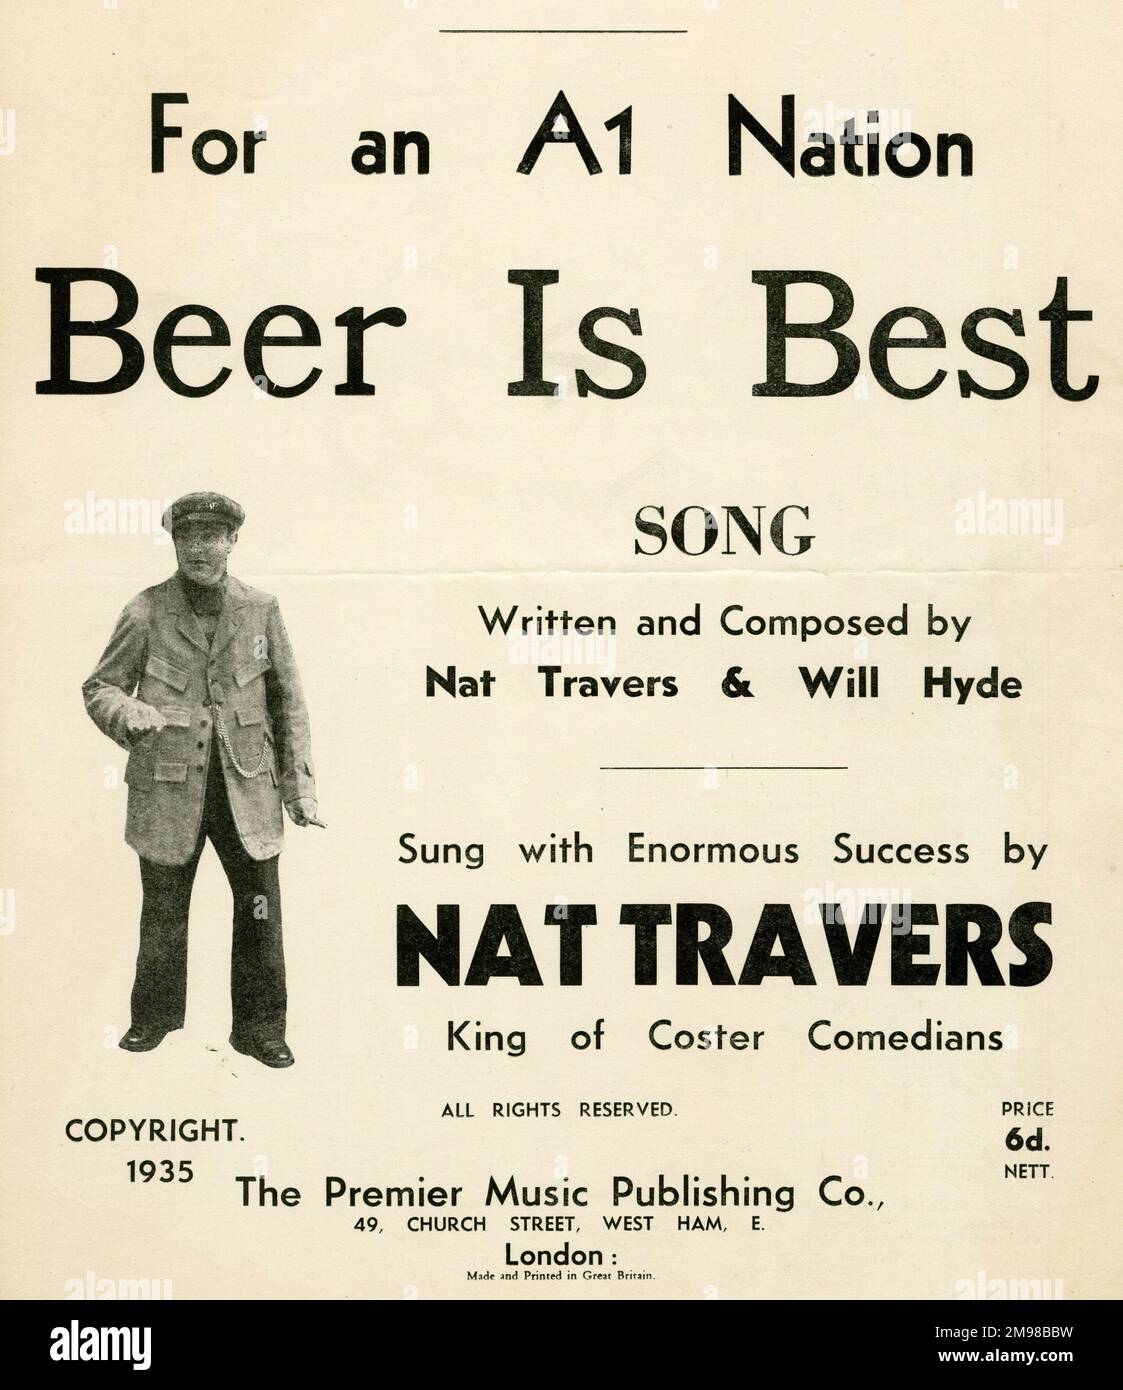 Music cover, For an A1 Nation Beer is Best, words and music by Nat Travers and Will Hyde, performed by Nat Travers, King of Coster Comedians. Stock Photo